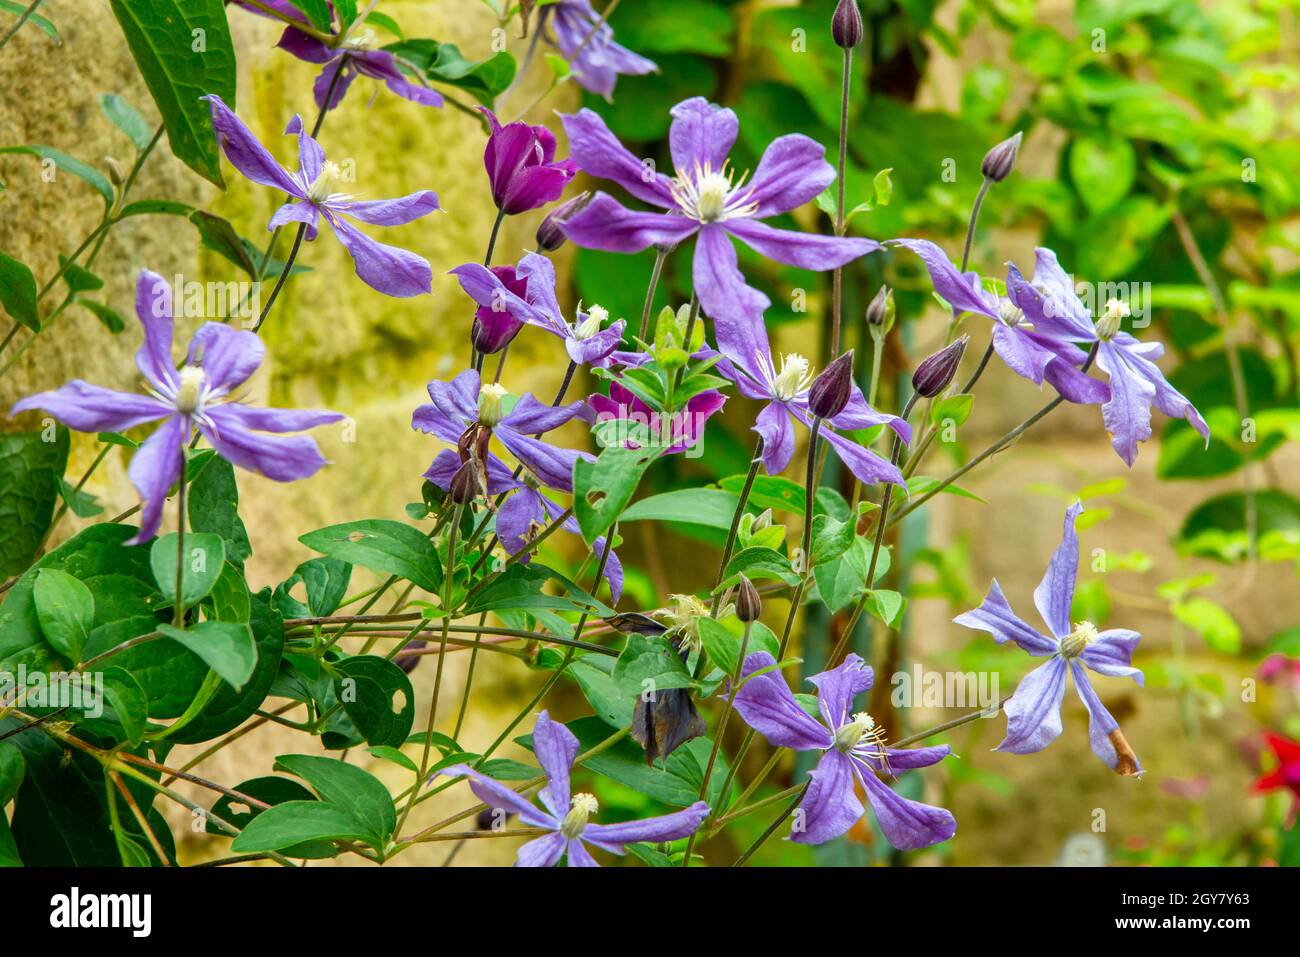 Purple clematis flowers growing on a wooden trellis in a garden with wall behind. Stock Photo